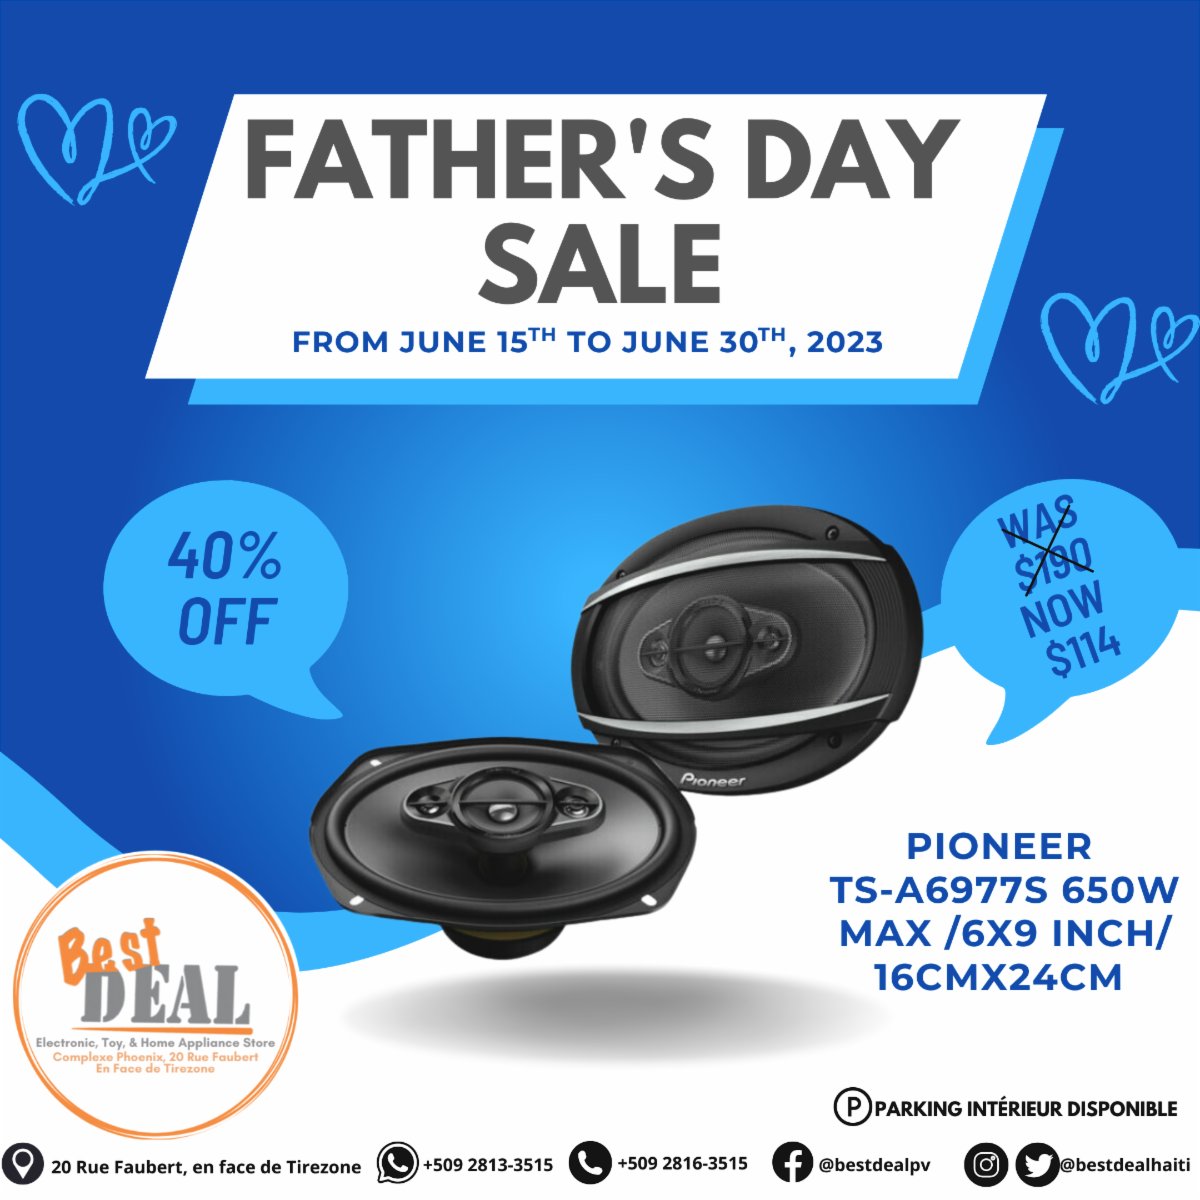 What Dad Wants, Dad Gets💙

#FatherGiftIdeas #DadDay #fetedesperes #papa #bonnefetepapa #fetedespapas #homme #cadeau #cadeaupapa #cadeaufetedesperes #ideecadeau #speaker #carspeaker #pioneer #sale #piyay #special